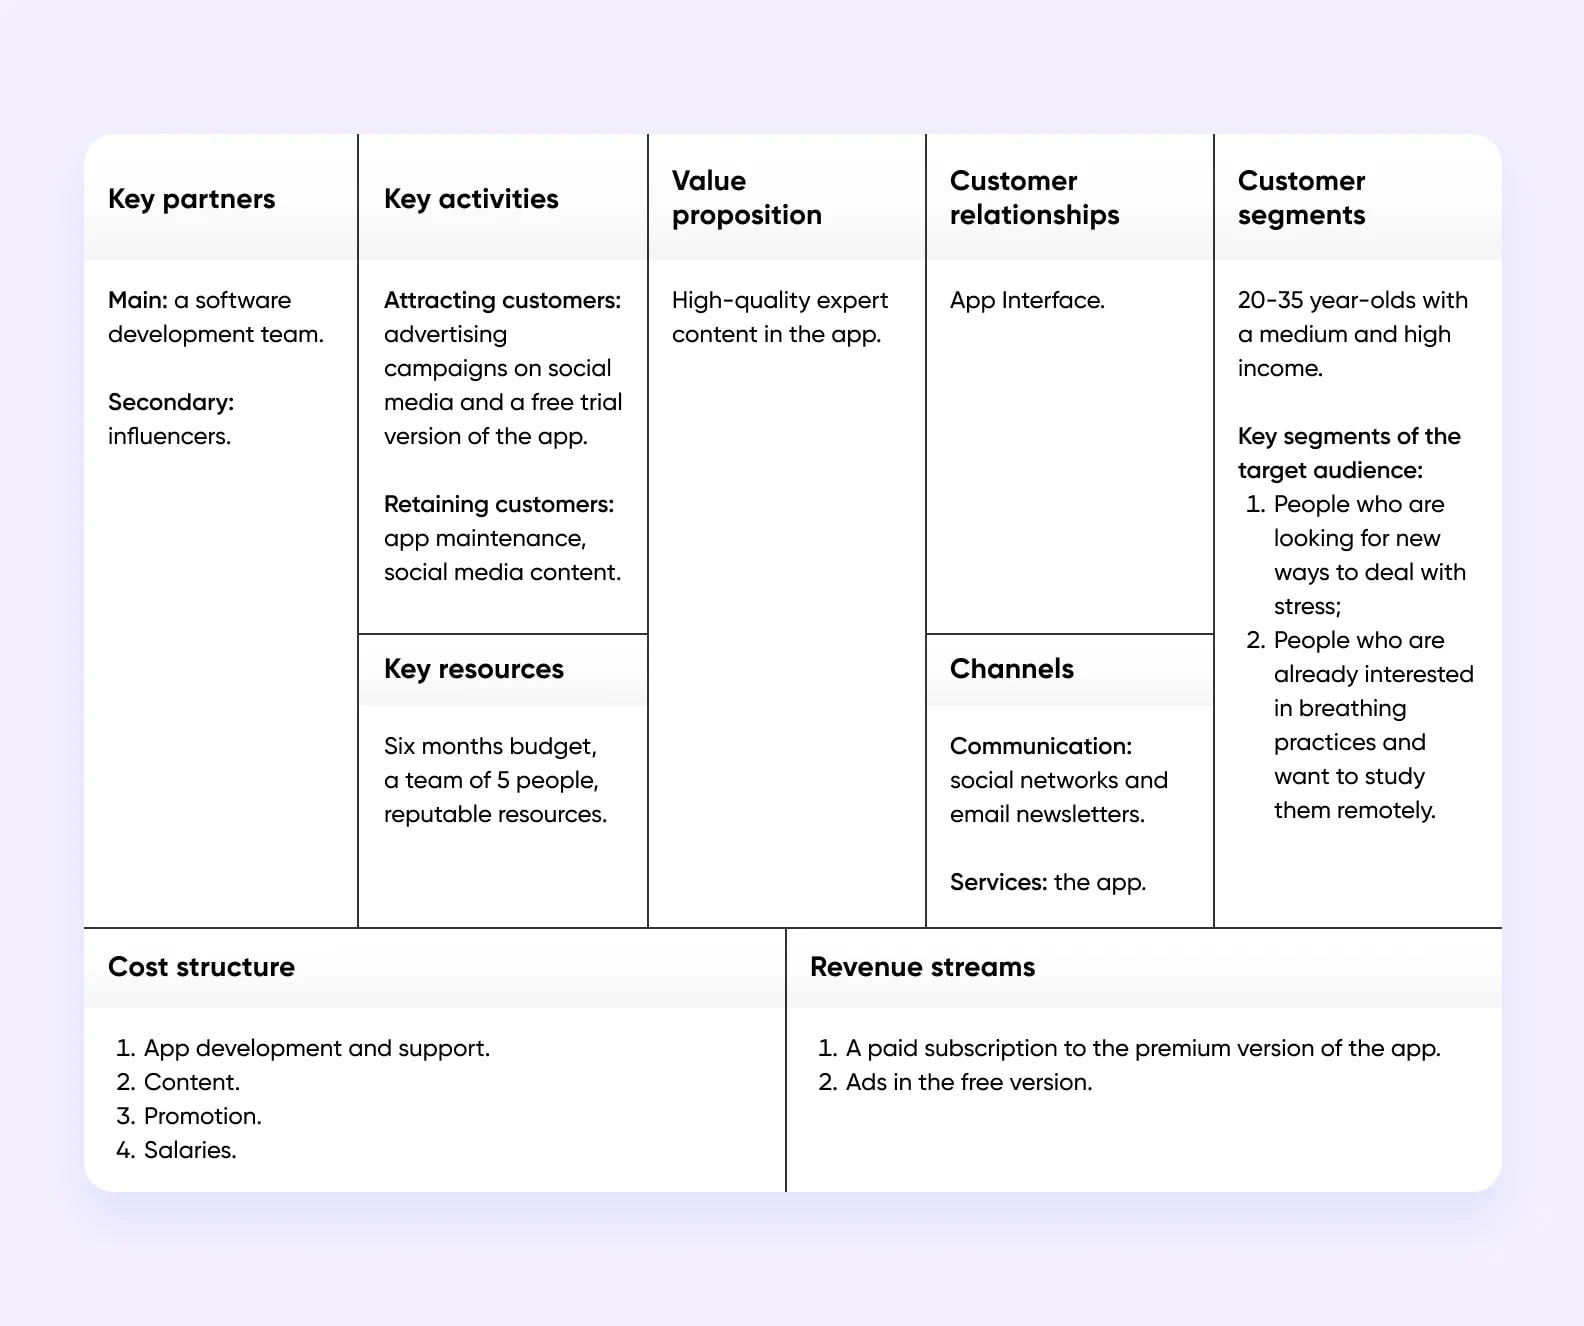 Business Model Canvas example